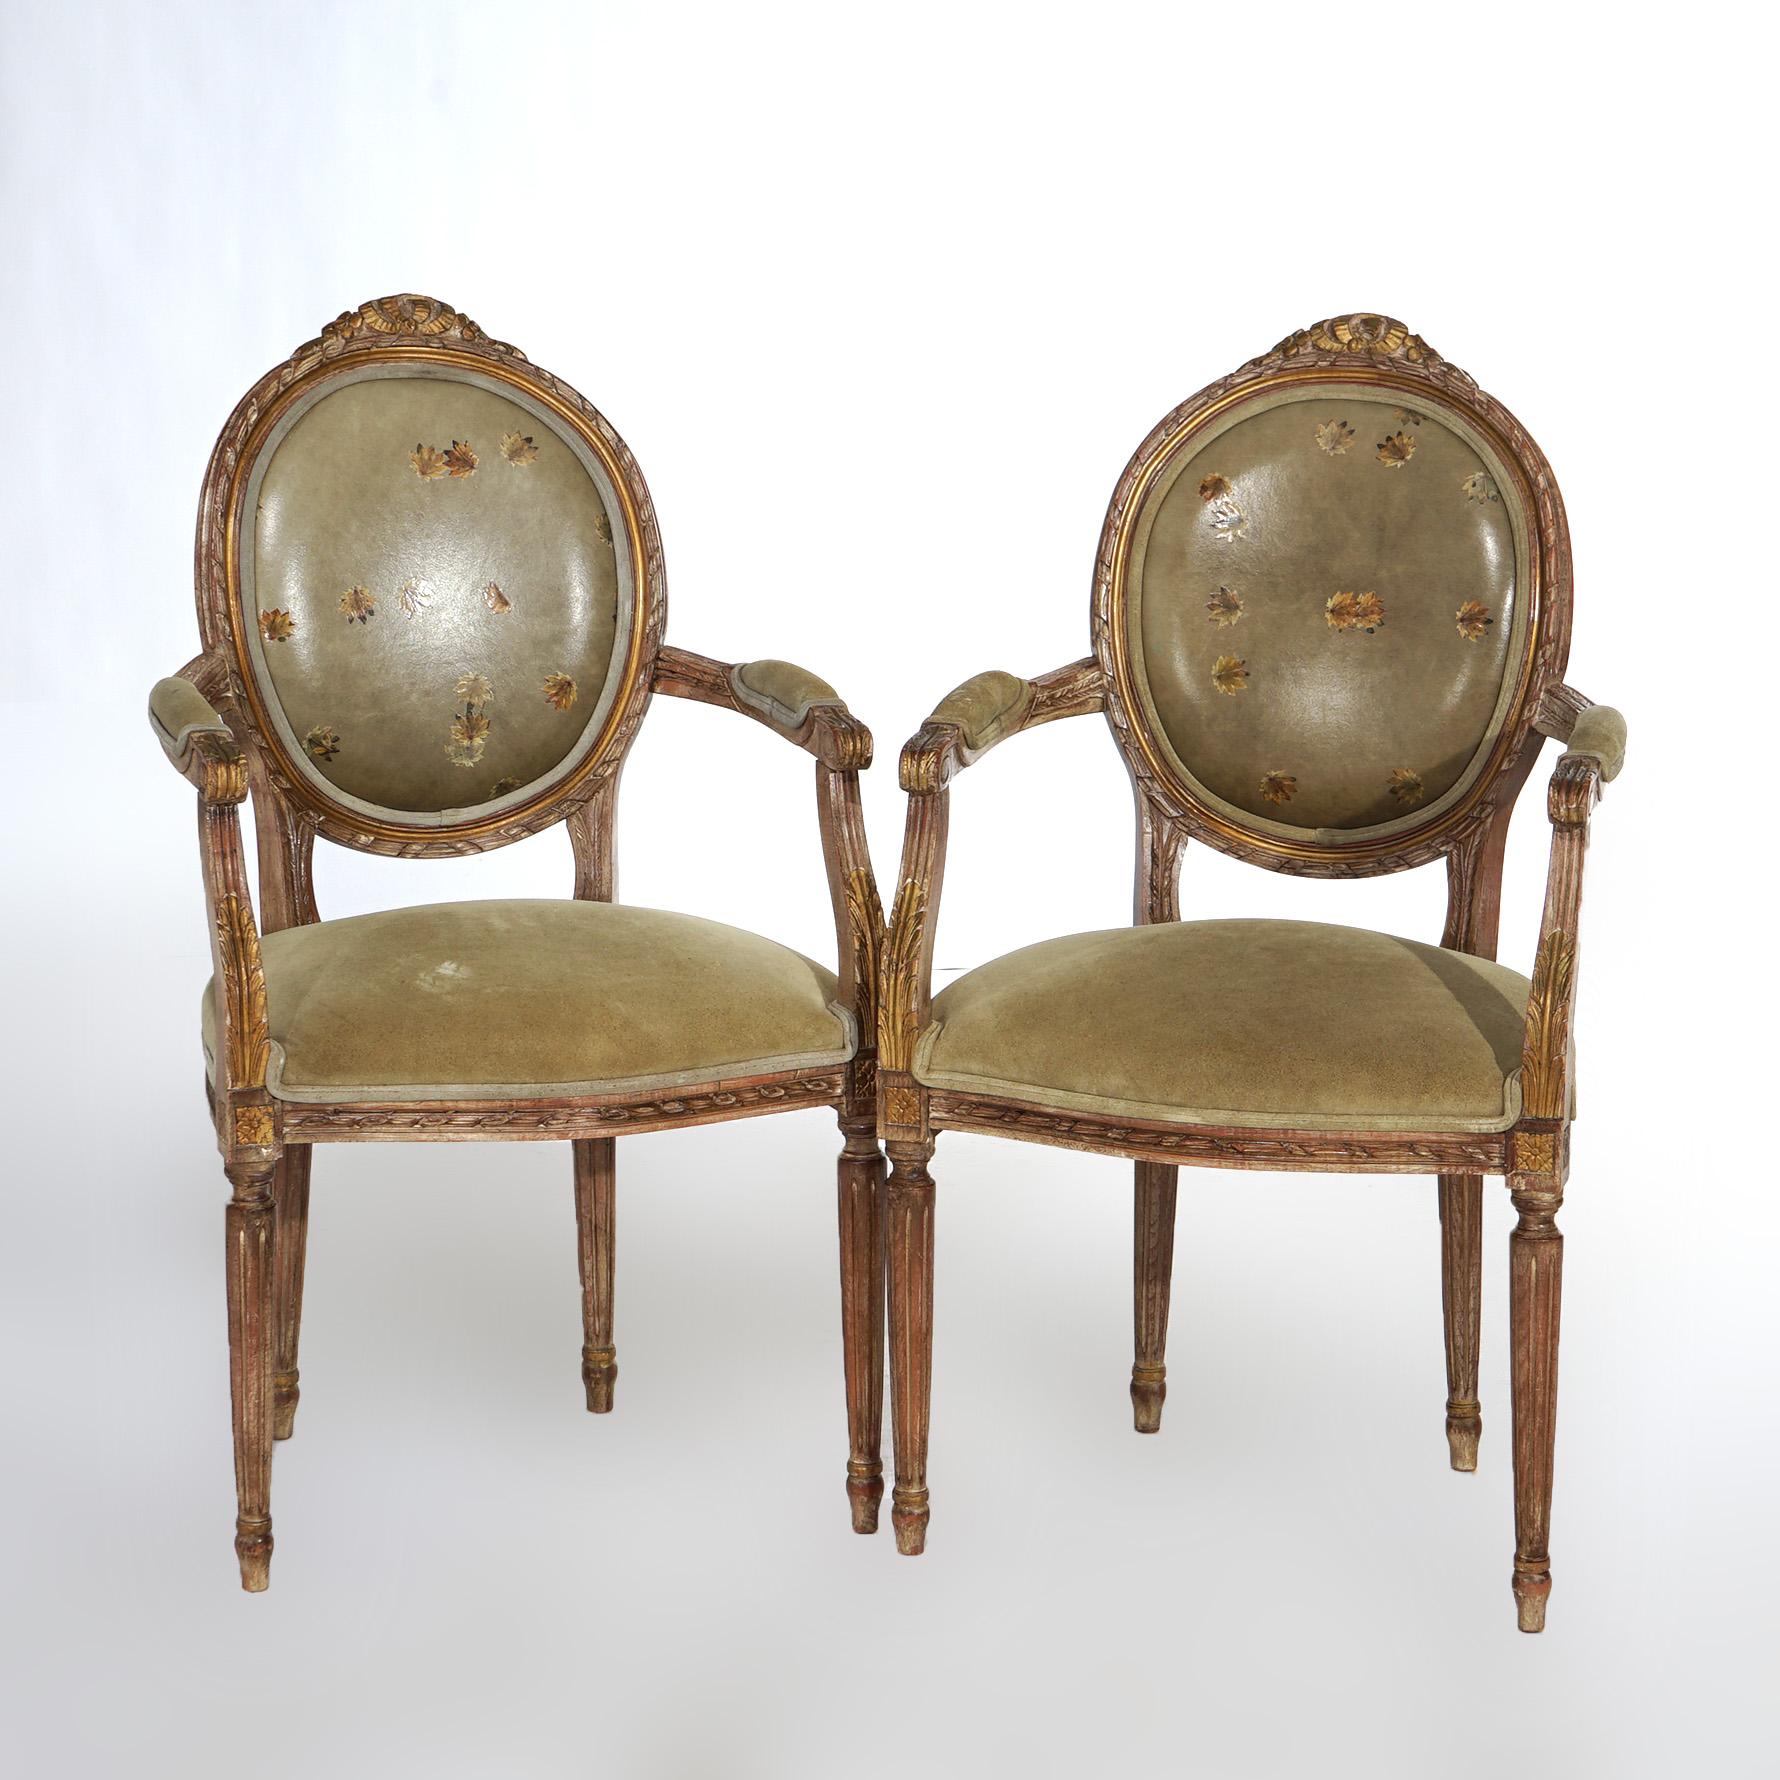 An antique pair of French Louis XVI style armchairs offer giltwood frames with carved foliate elements housing leather backs and seats with hand painted flower design, 20th century

Measures - 39